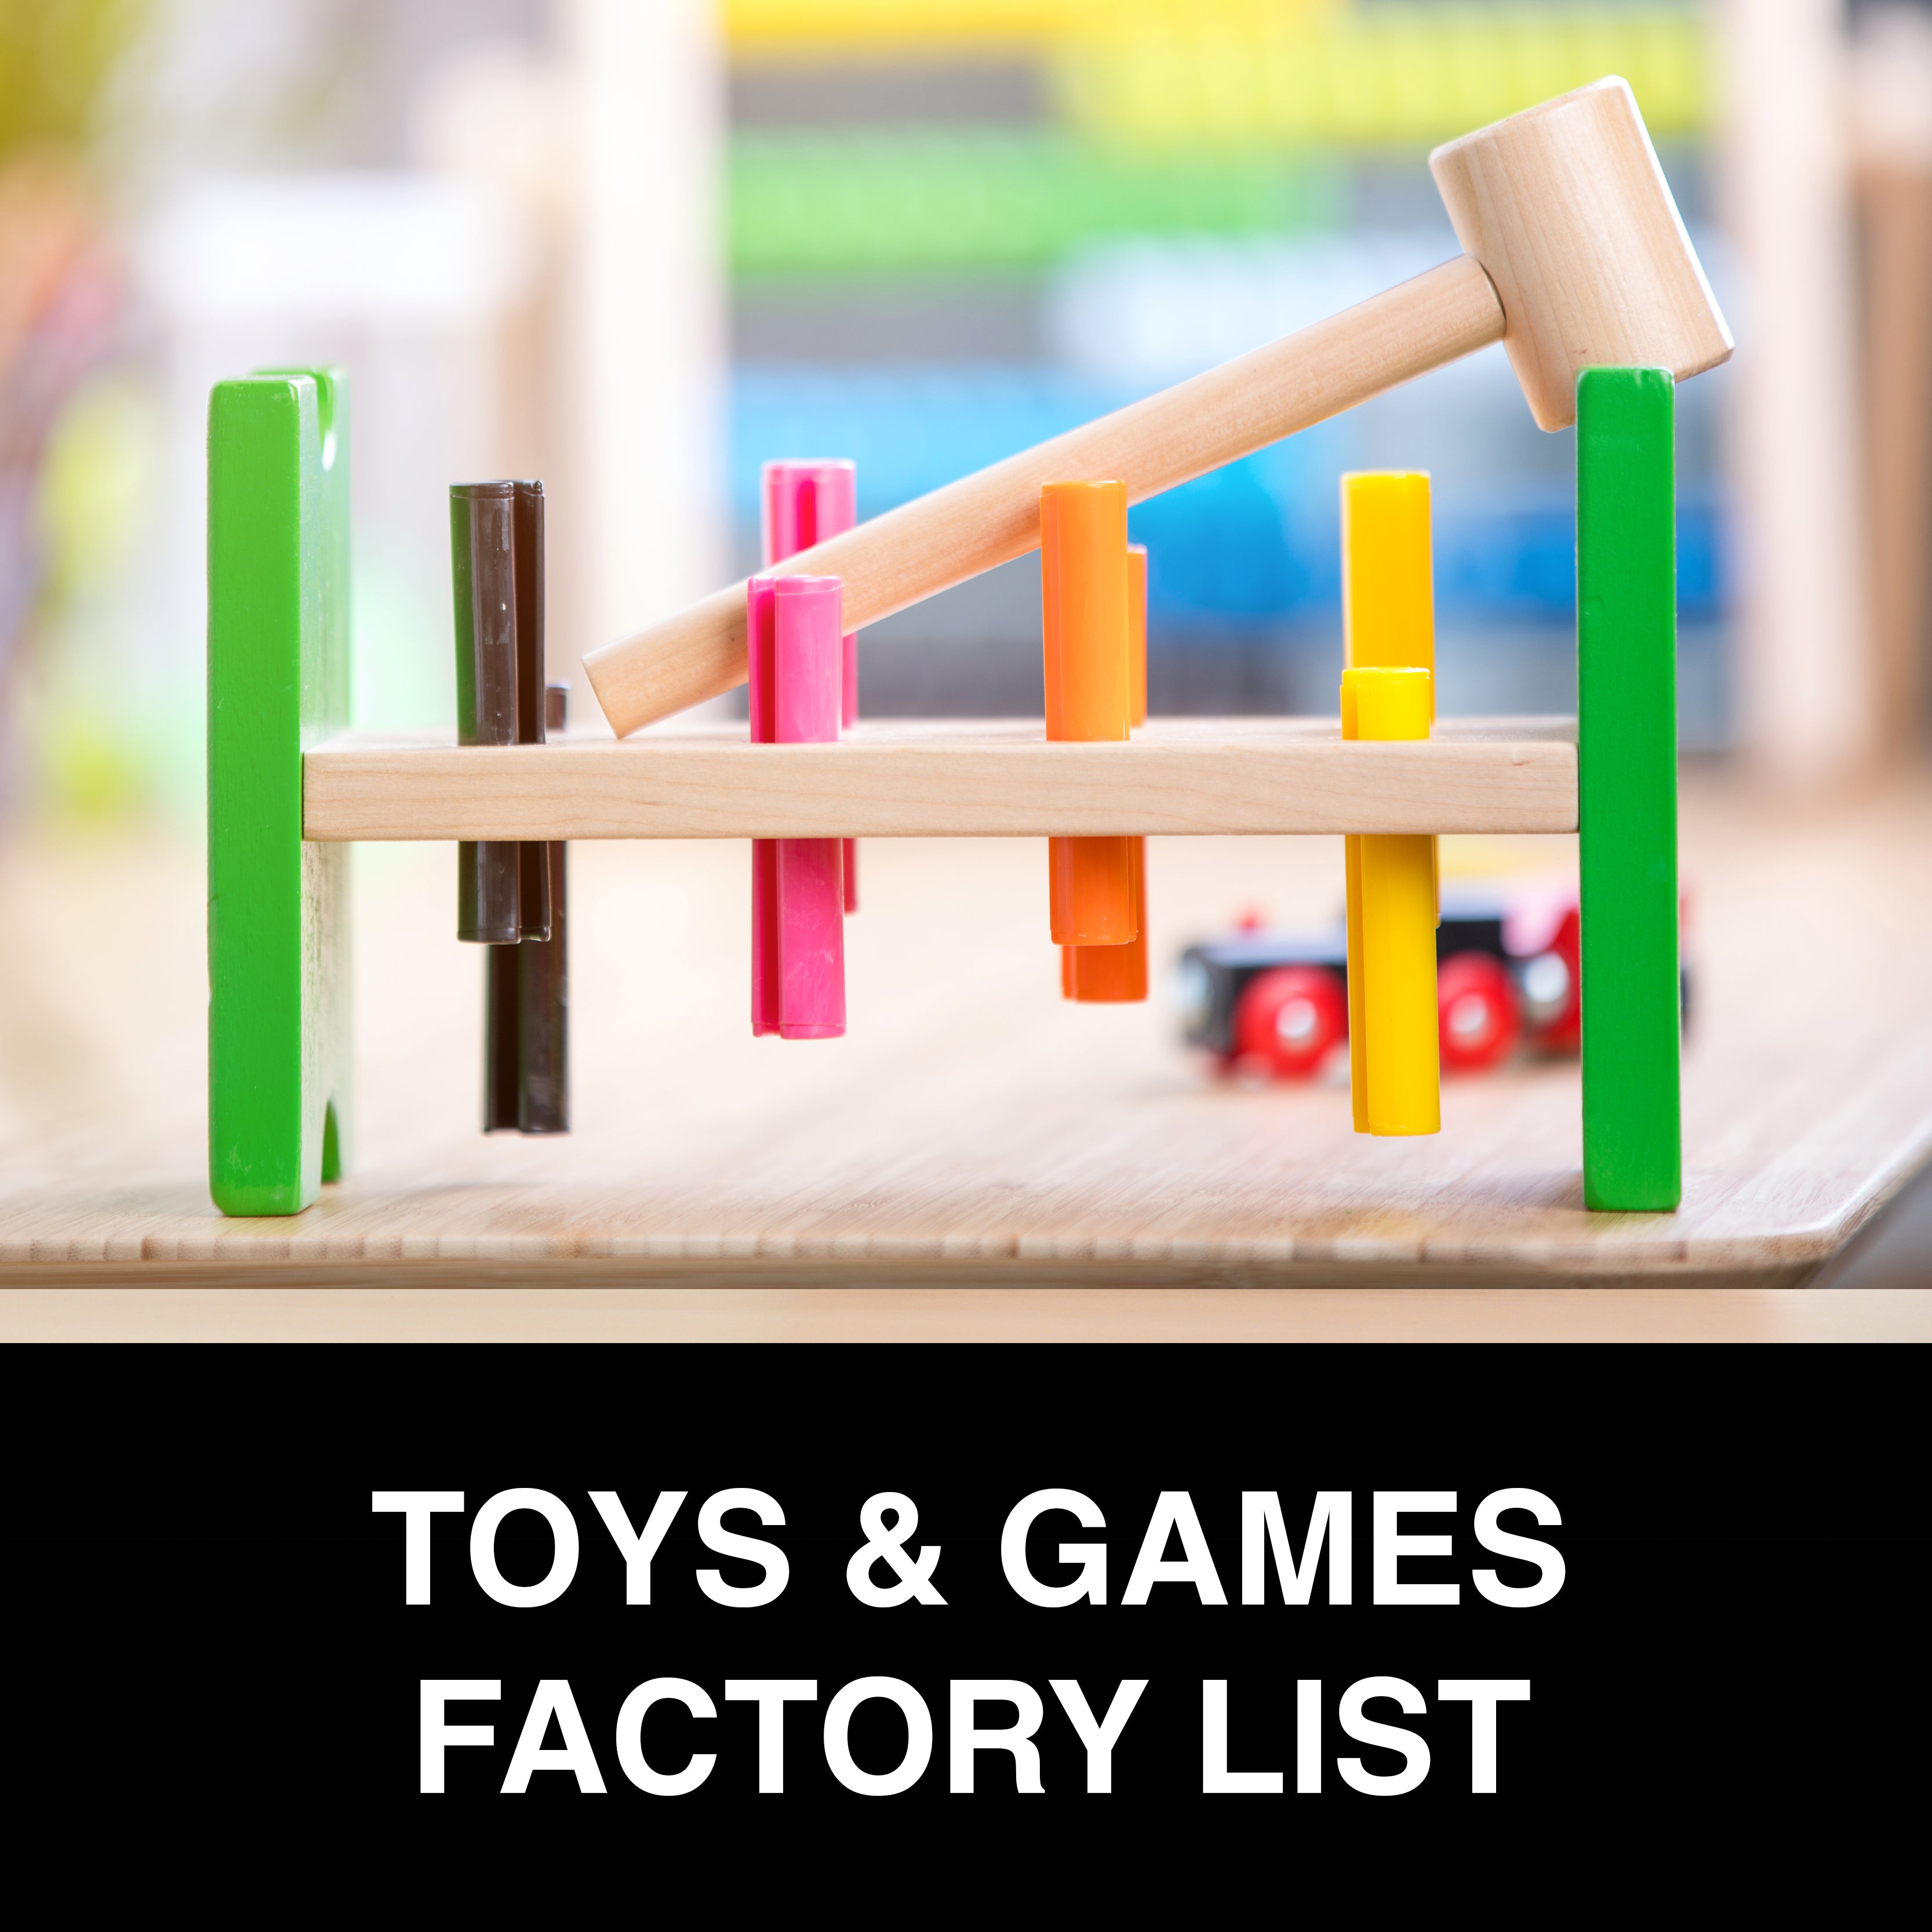 Toys & Games Factory List